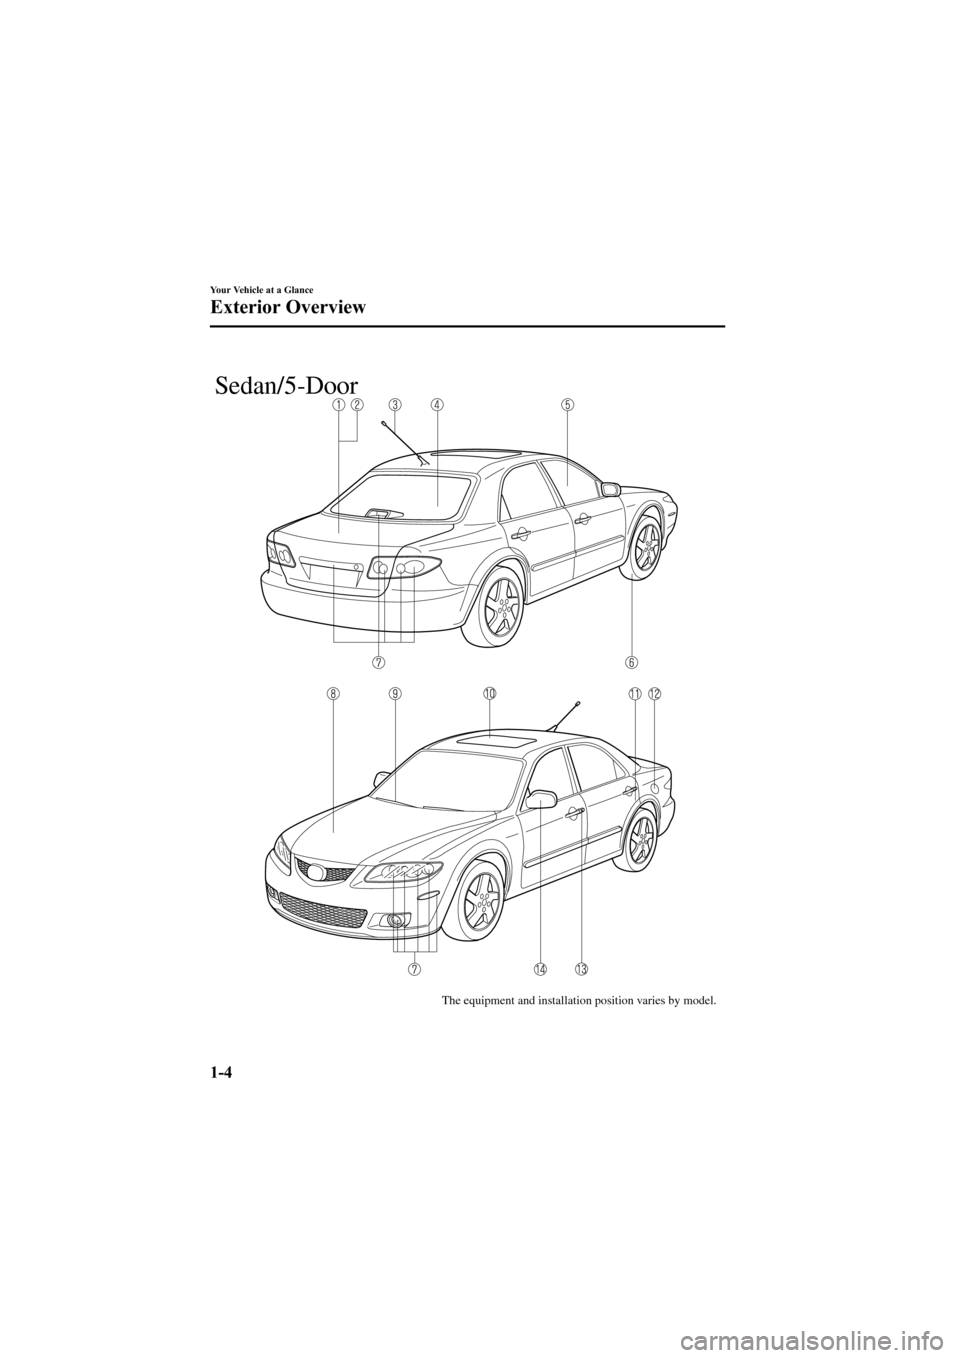 MAZDA MODEL 6 2007  Owners Manual (in English) Black plate (10,1)
The equipment and installation position varies by model.
Sedan/5-Door
1-4
Your Vehicle at a Glance
Exterior Overview
Mazda6_8W89-EA-06K_Edition1 Page10
Tuesday, November 14 2006 1:2